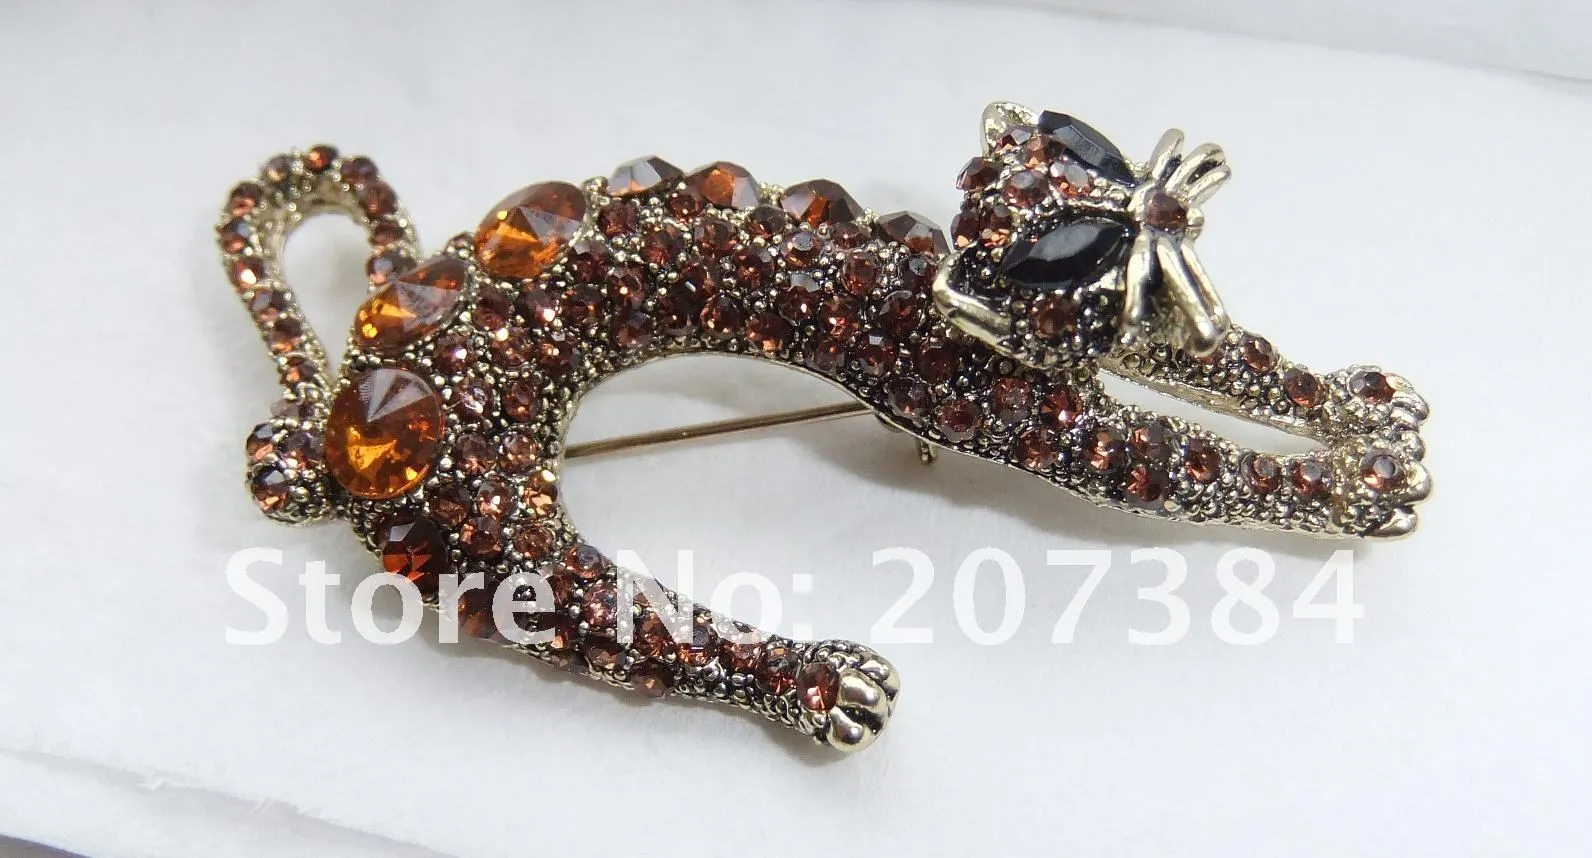 wholesale free shipping, zircon cat women brooches,fashion alloy cat crystal animal brooch,2 colors